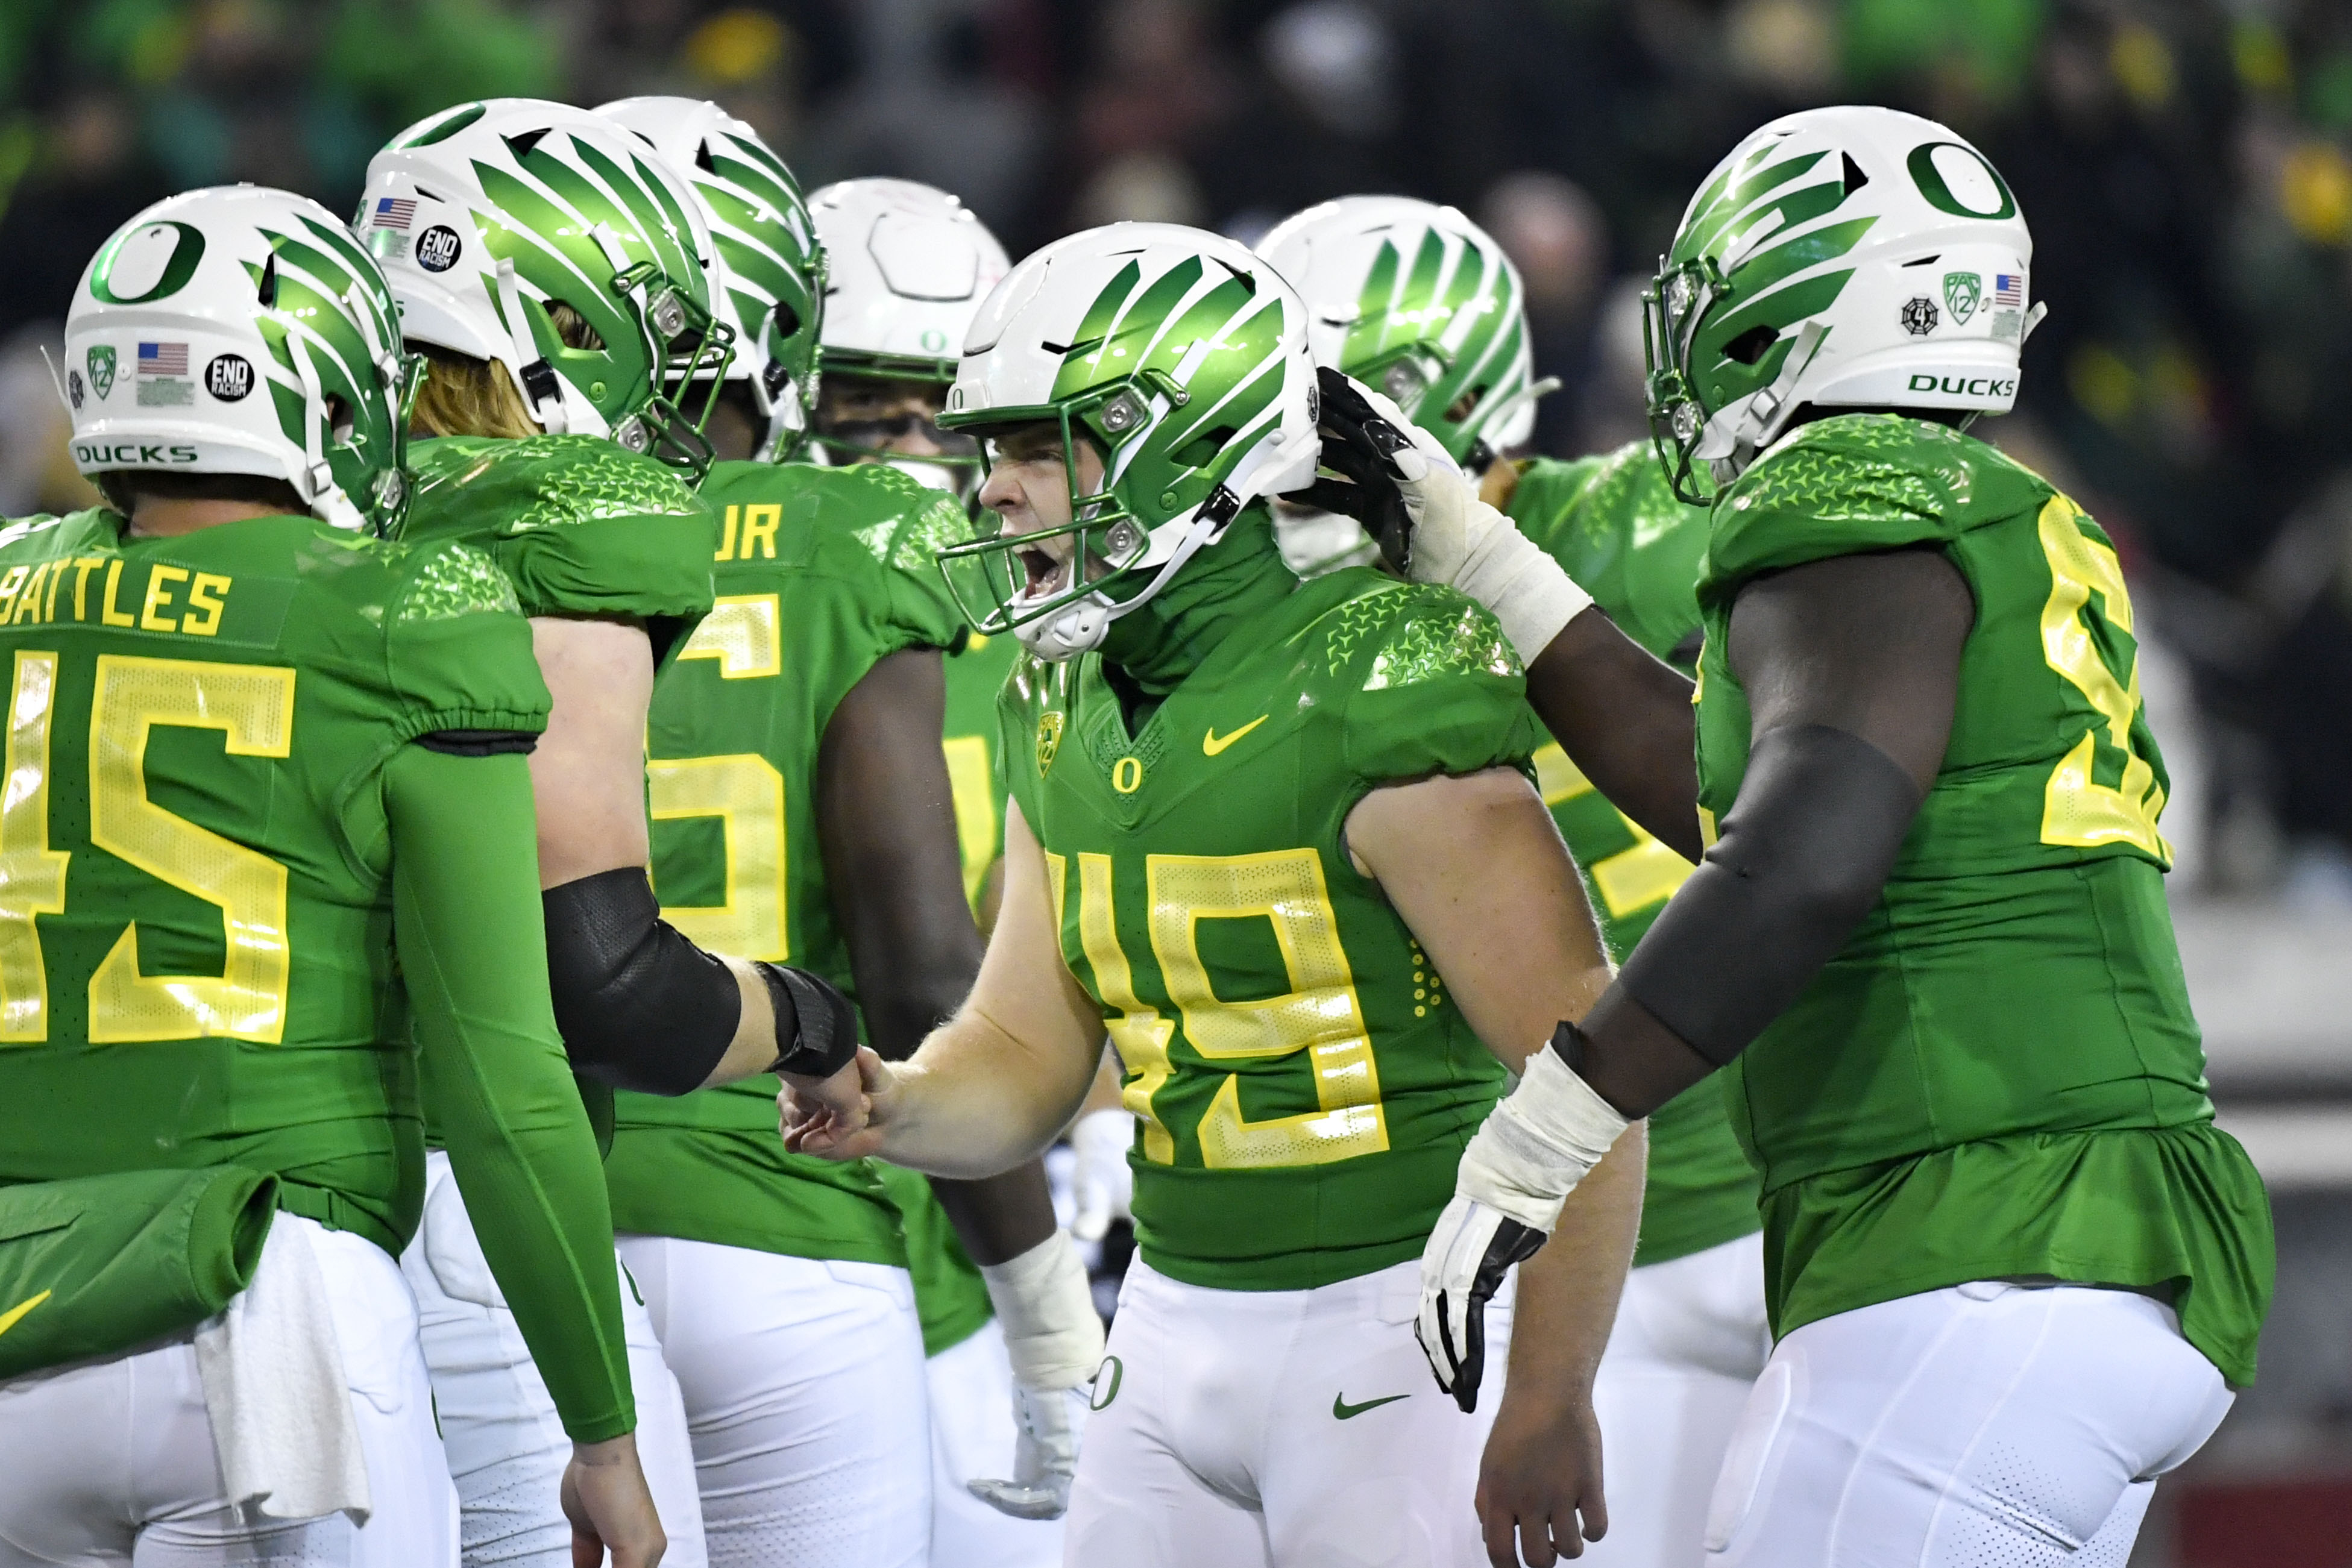 Oregon's uniforms have gotten out of hand this year, and that's